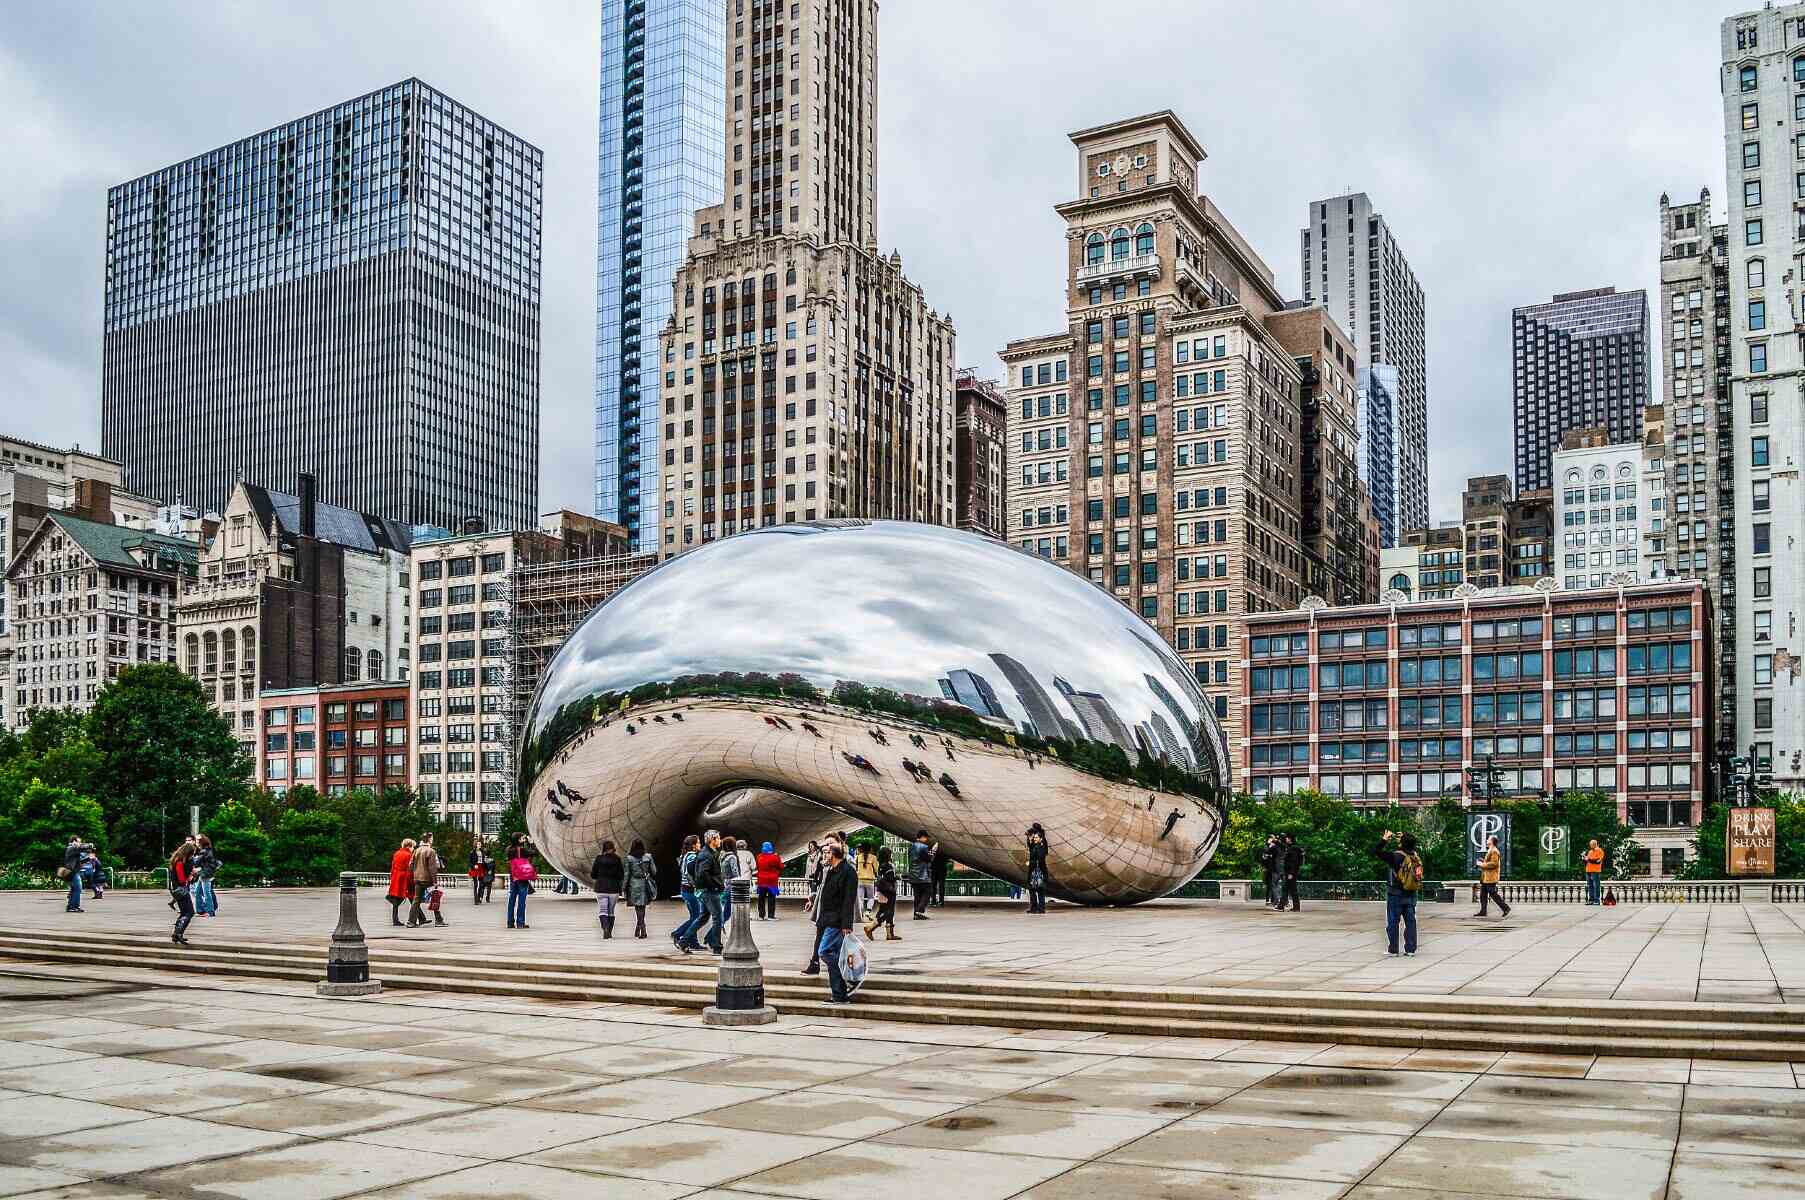 What Is The Official Name Of The Chicago Bean Sculpture